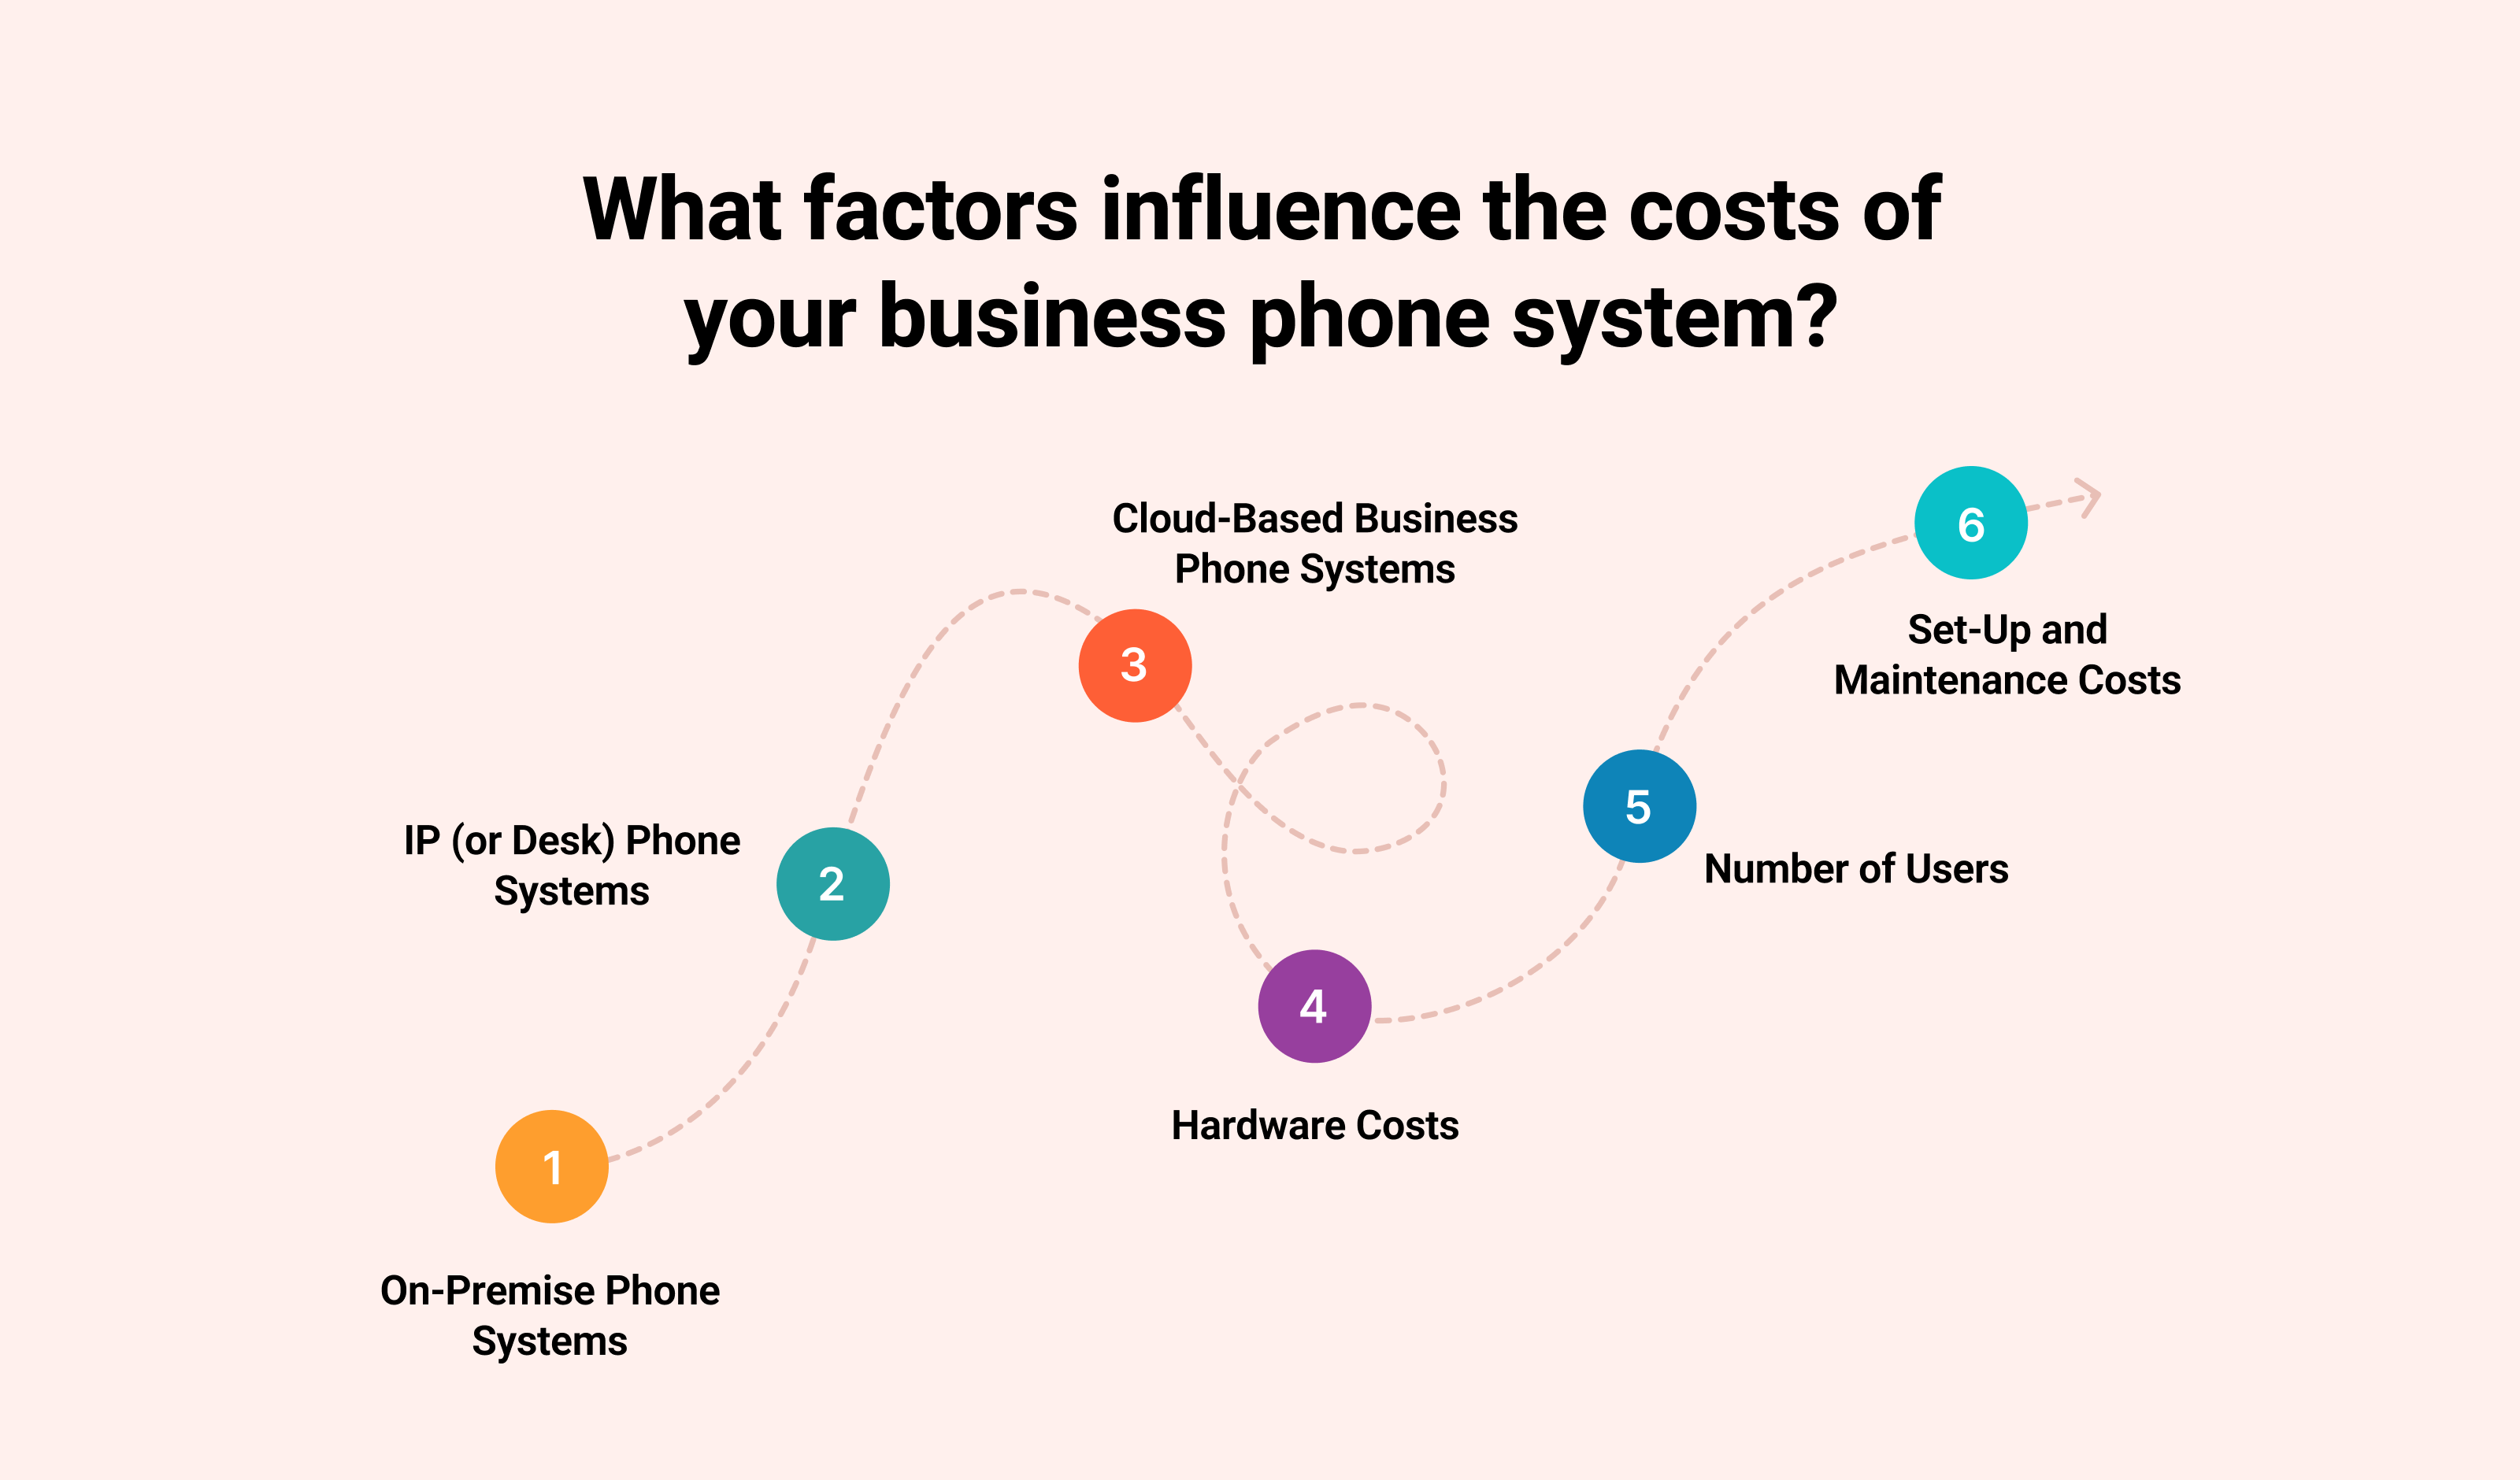 What factors influence the costs of your business phone system?